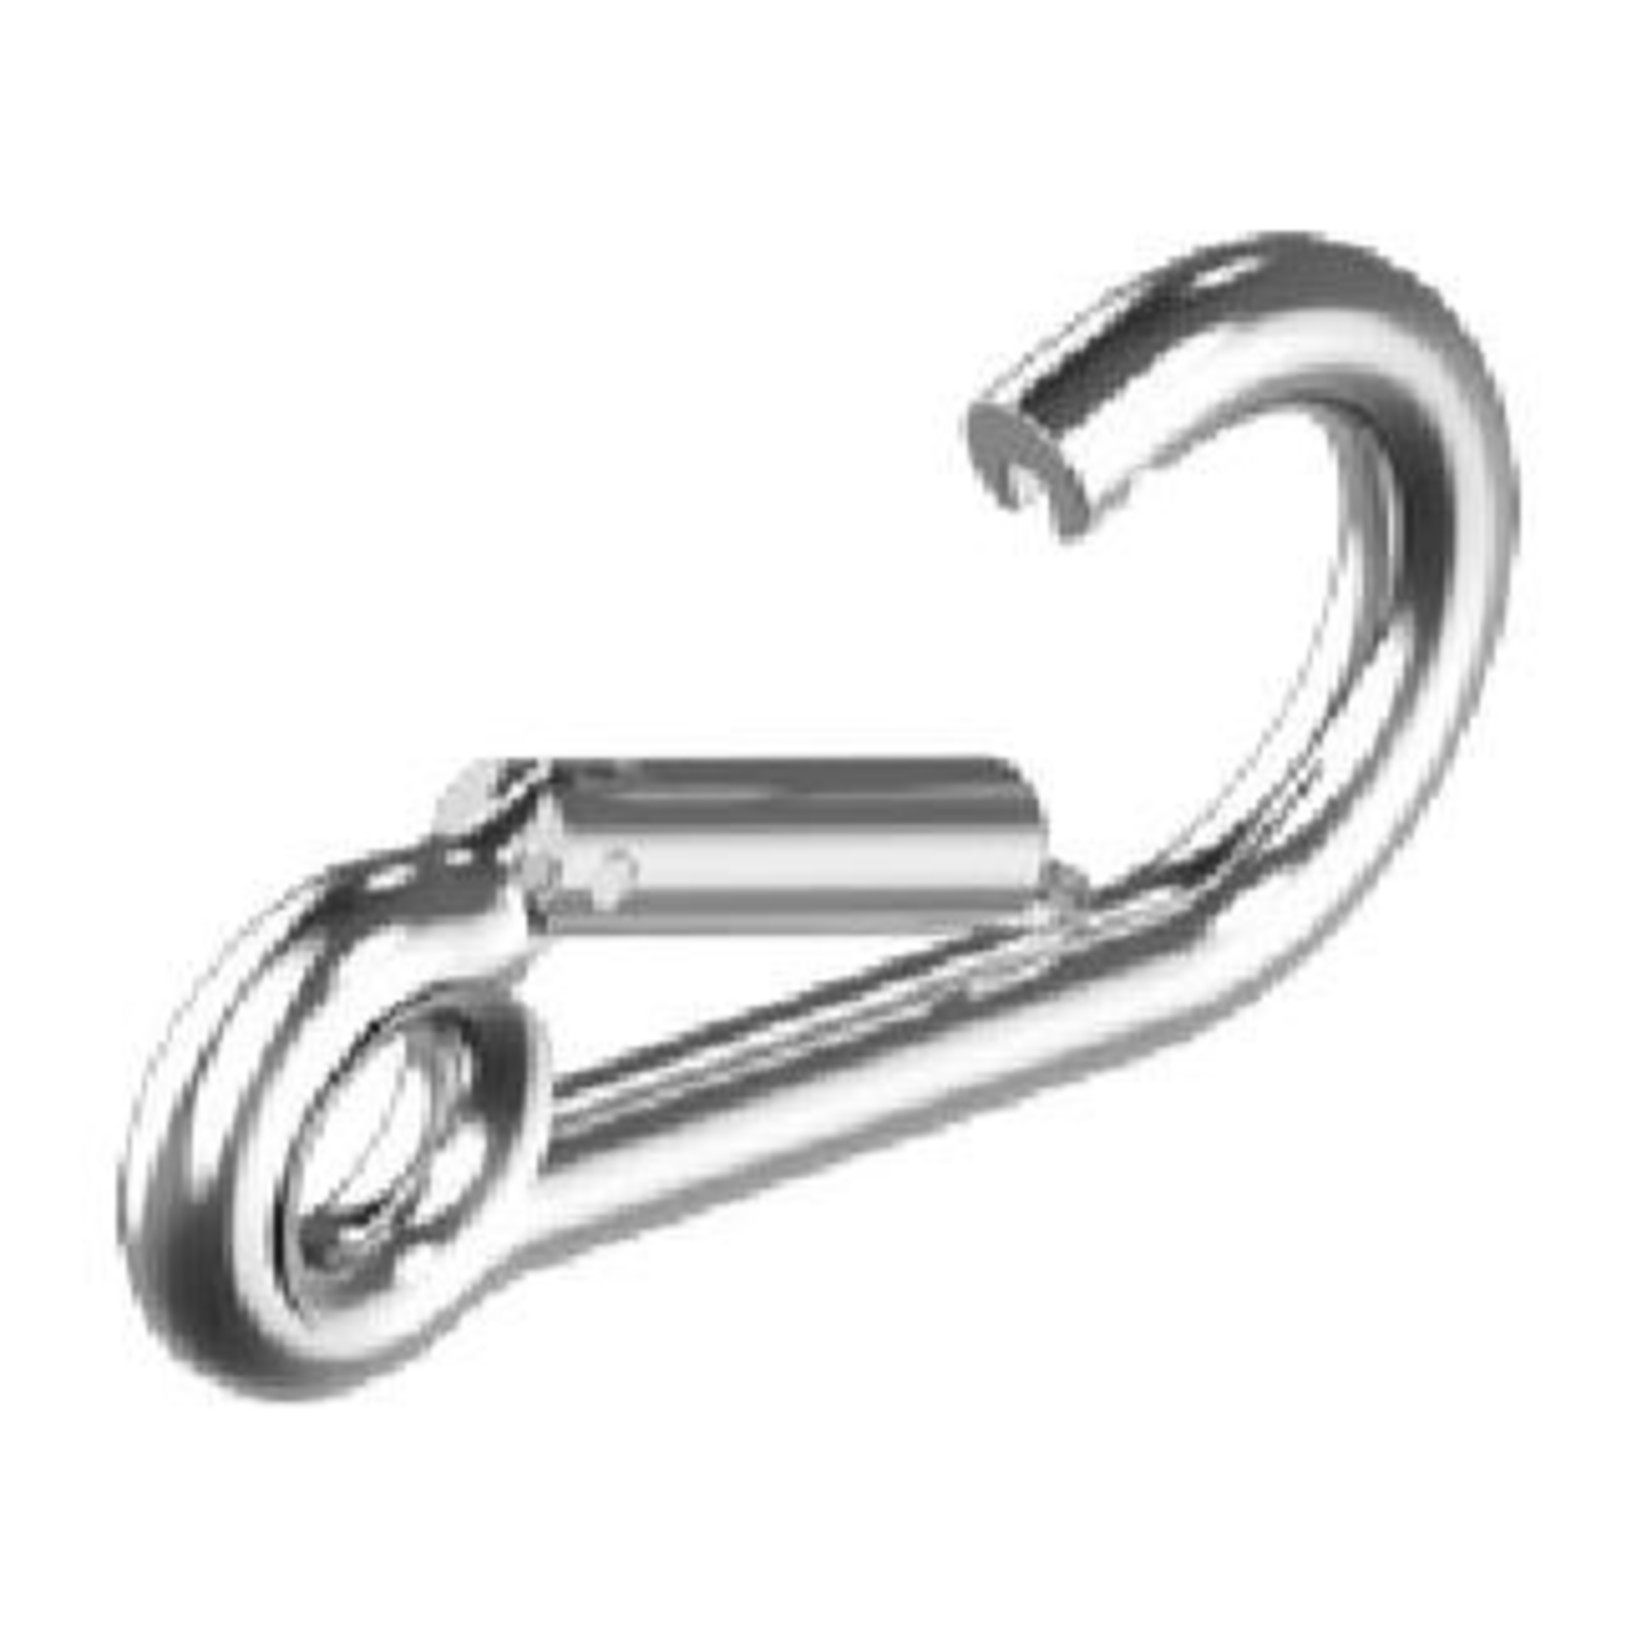 Snap hook with eye 5x50mm